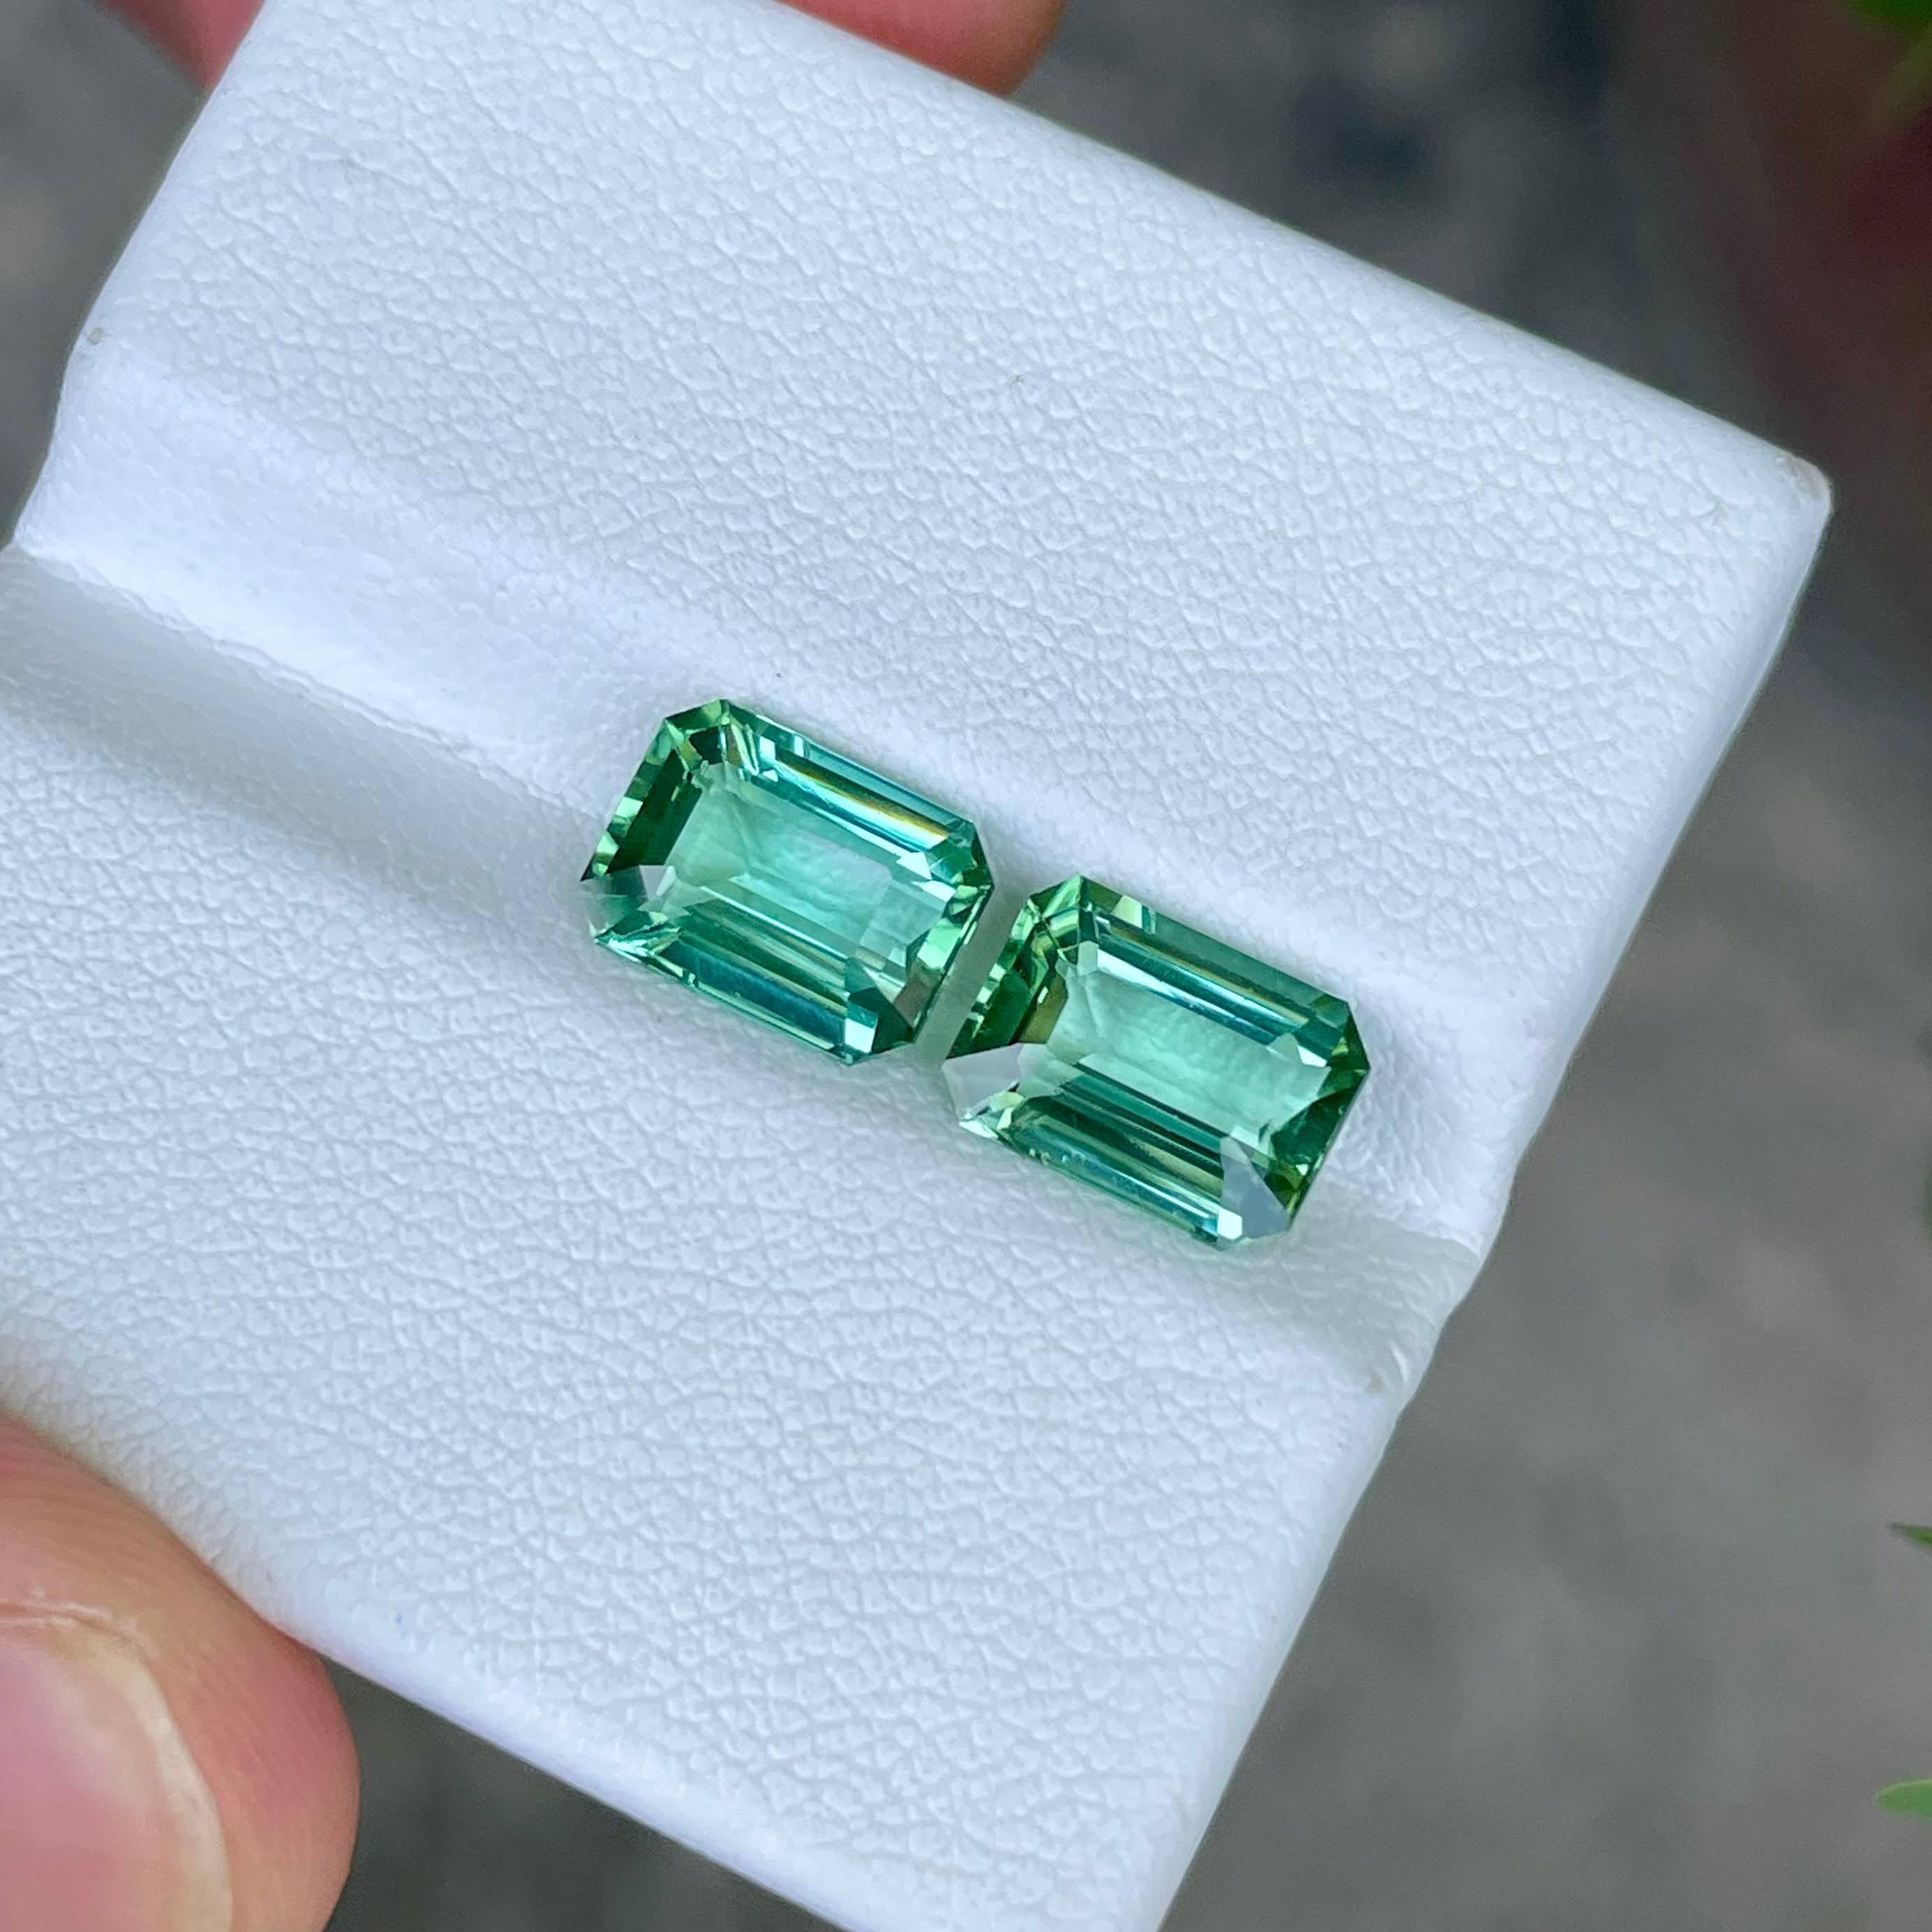 Weight 4.70 carats
Dimensions 9.2x6.85x4.6 mm
Treatment none 
Origin Afghanistan 
Clarity VVS (Very, Very Slightly Included)
Shape octagon 
Cut emerald 





Behold the exquisite allure of this stunning pair of Sea Blue Tourmaline gemstones, each